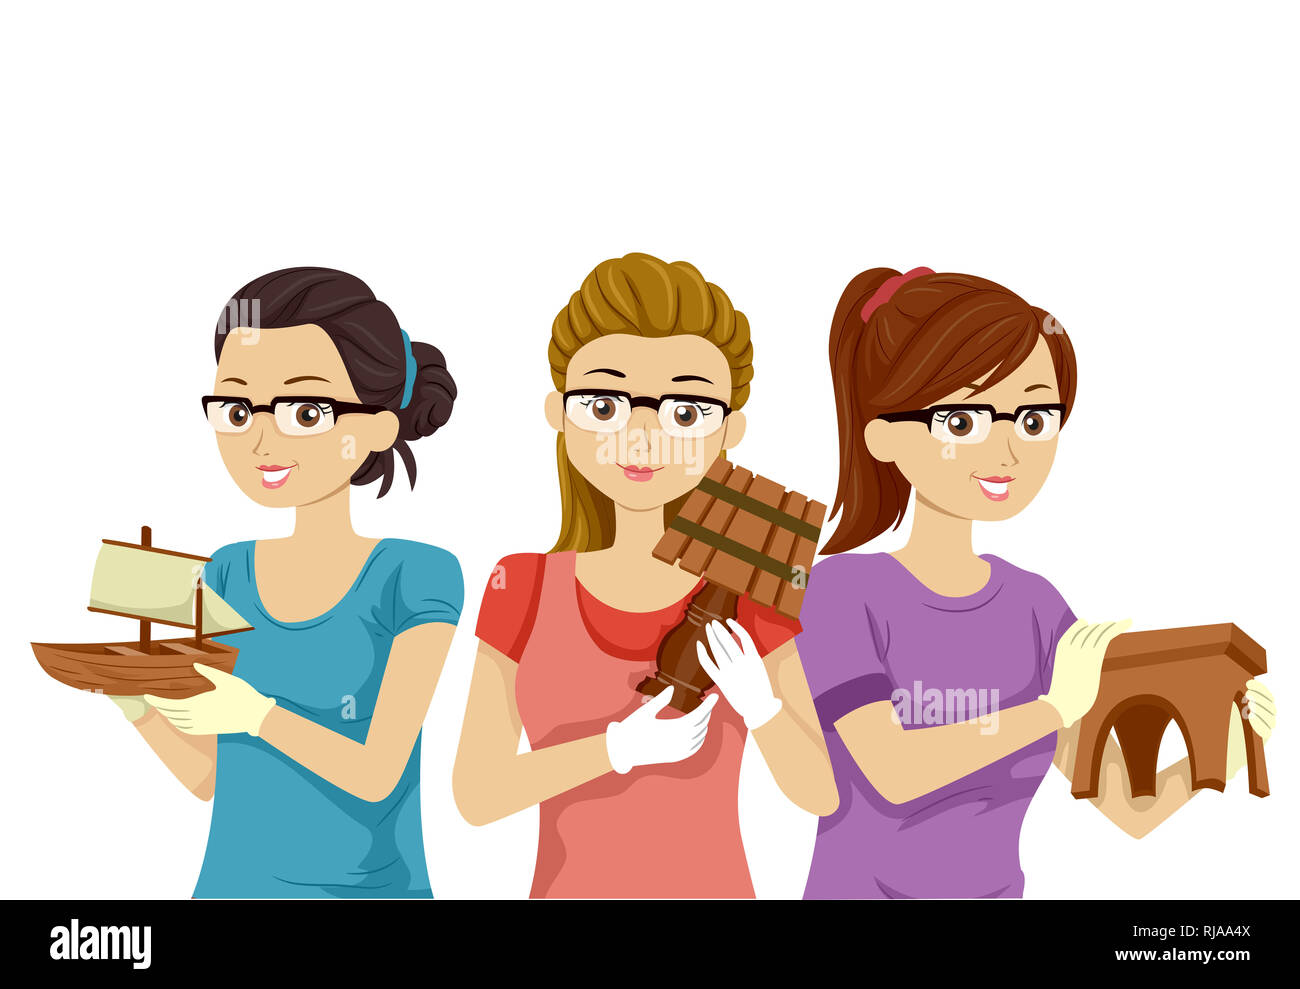 Illustration of Teenage Girls Wearing Goggles and Gloves Showing Their Woodworking Projects from Boat, Lamp and Stool Stock Photo